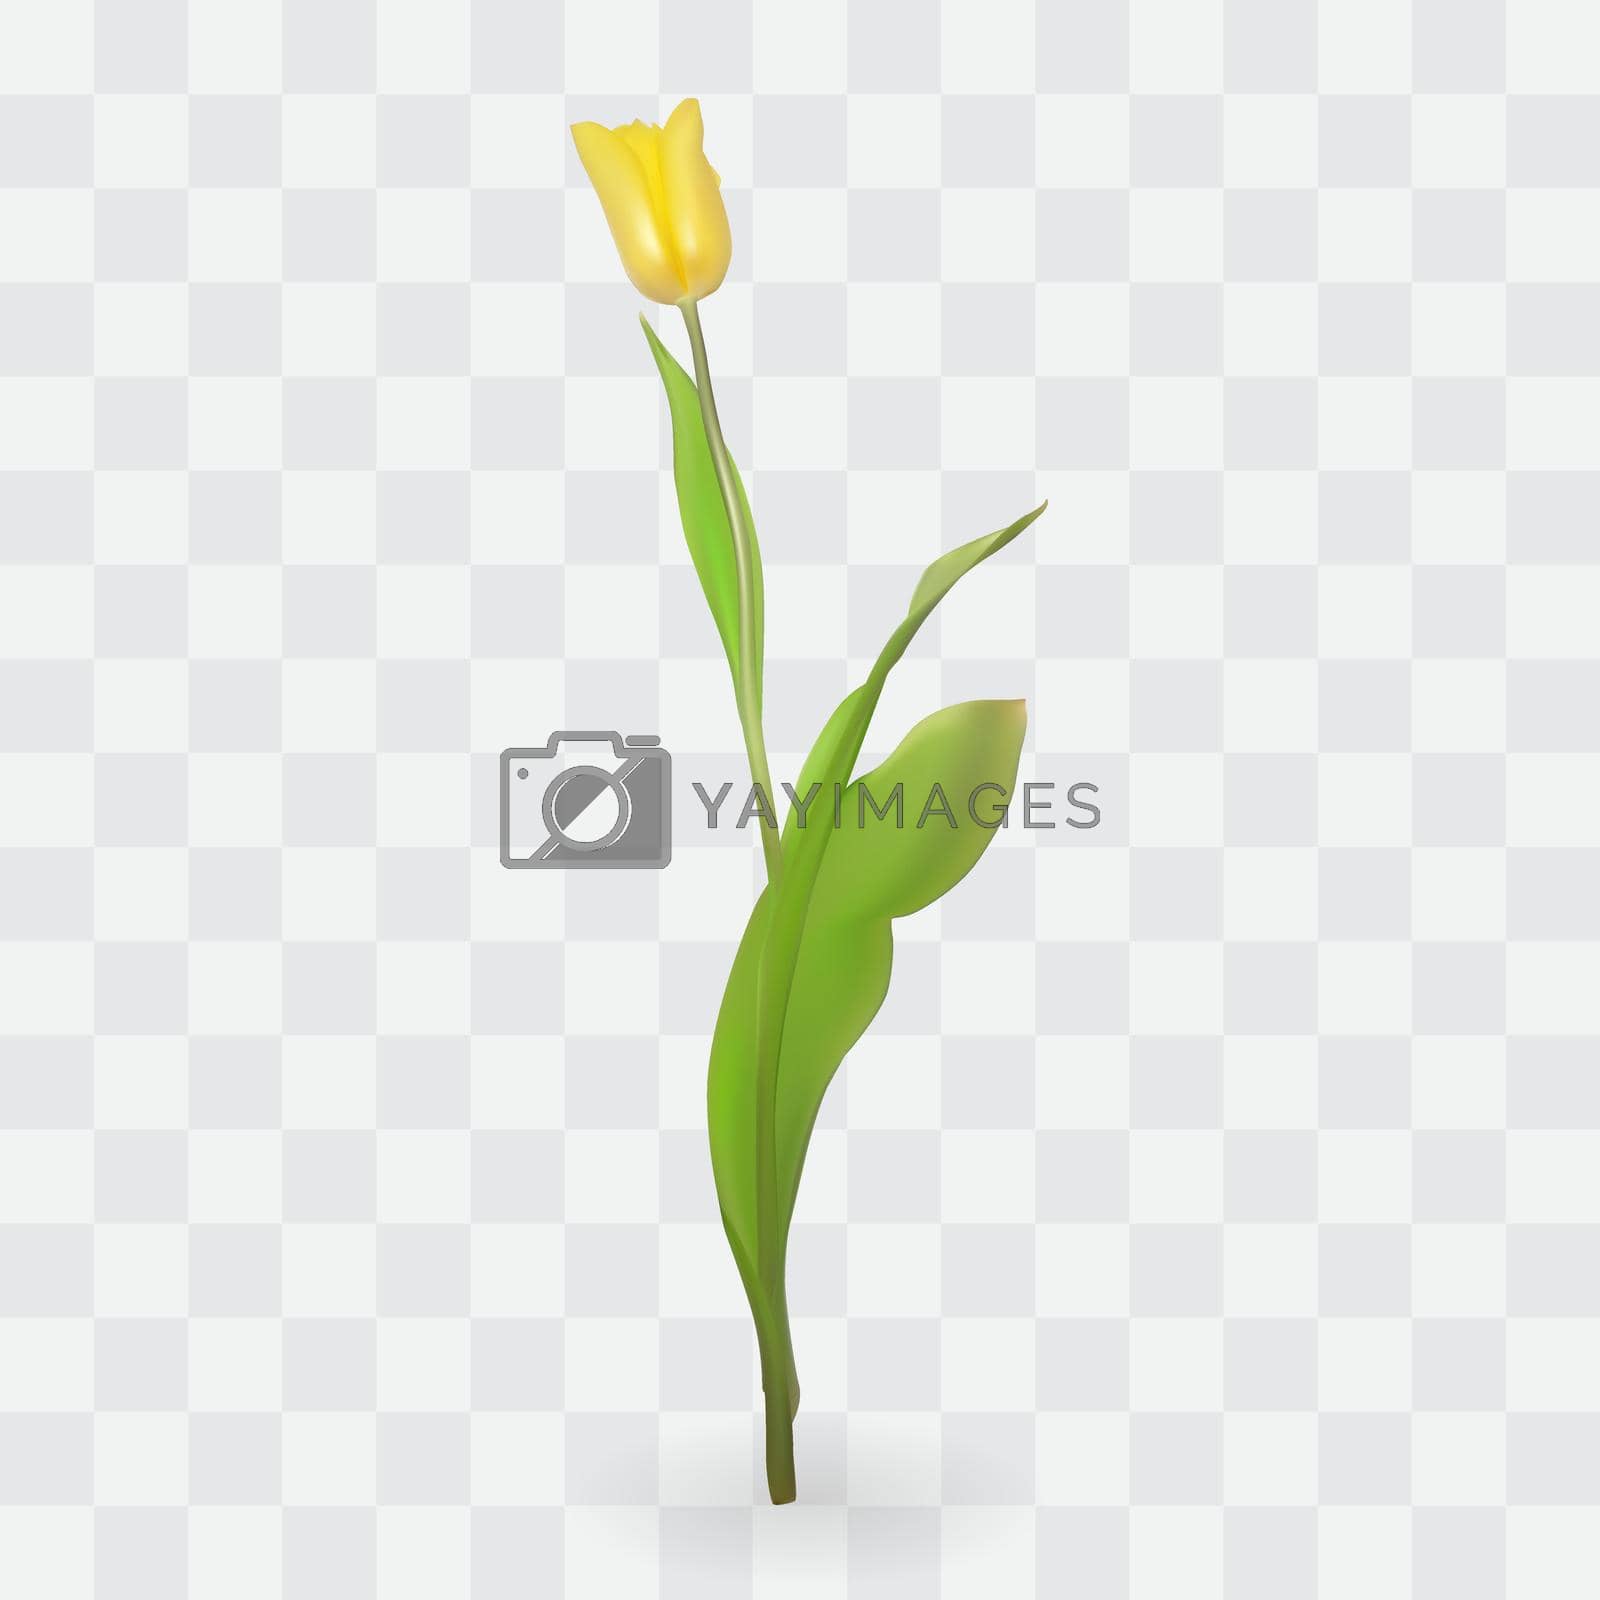 Royalty free image of Beautiful tulips on transparent background. Vector Illustration by yganko